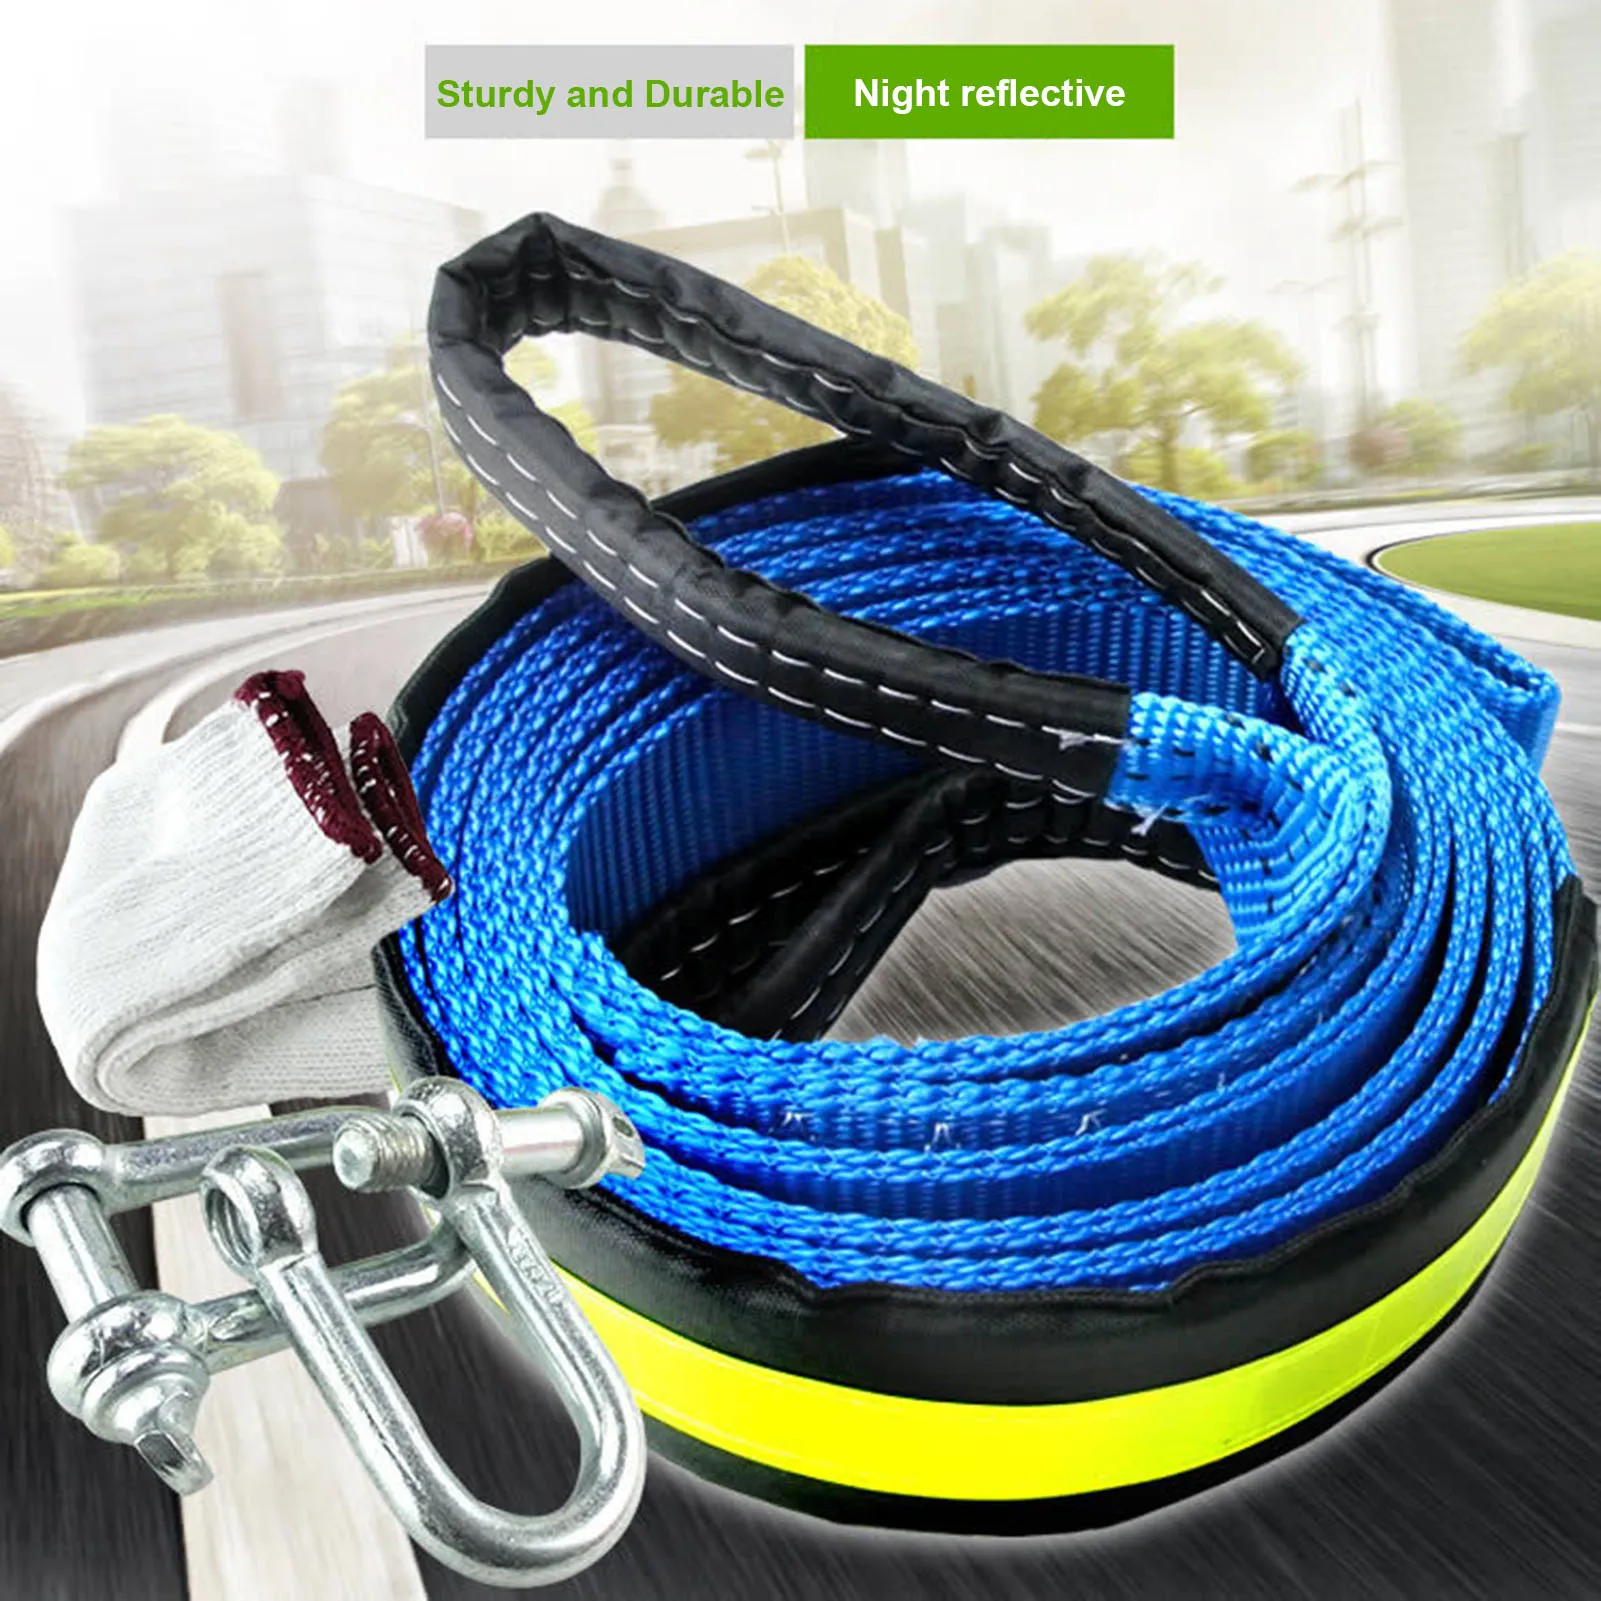 

5M 8 Tons Car Towing Recovery Rope Kit Heavy Duty Reflective Tow Strap Accessories With Hooks For Truck Off-road Emergency Tool